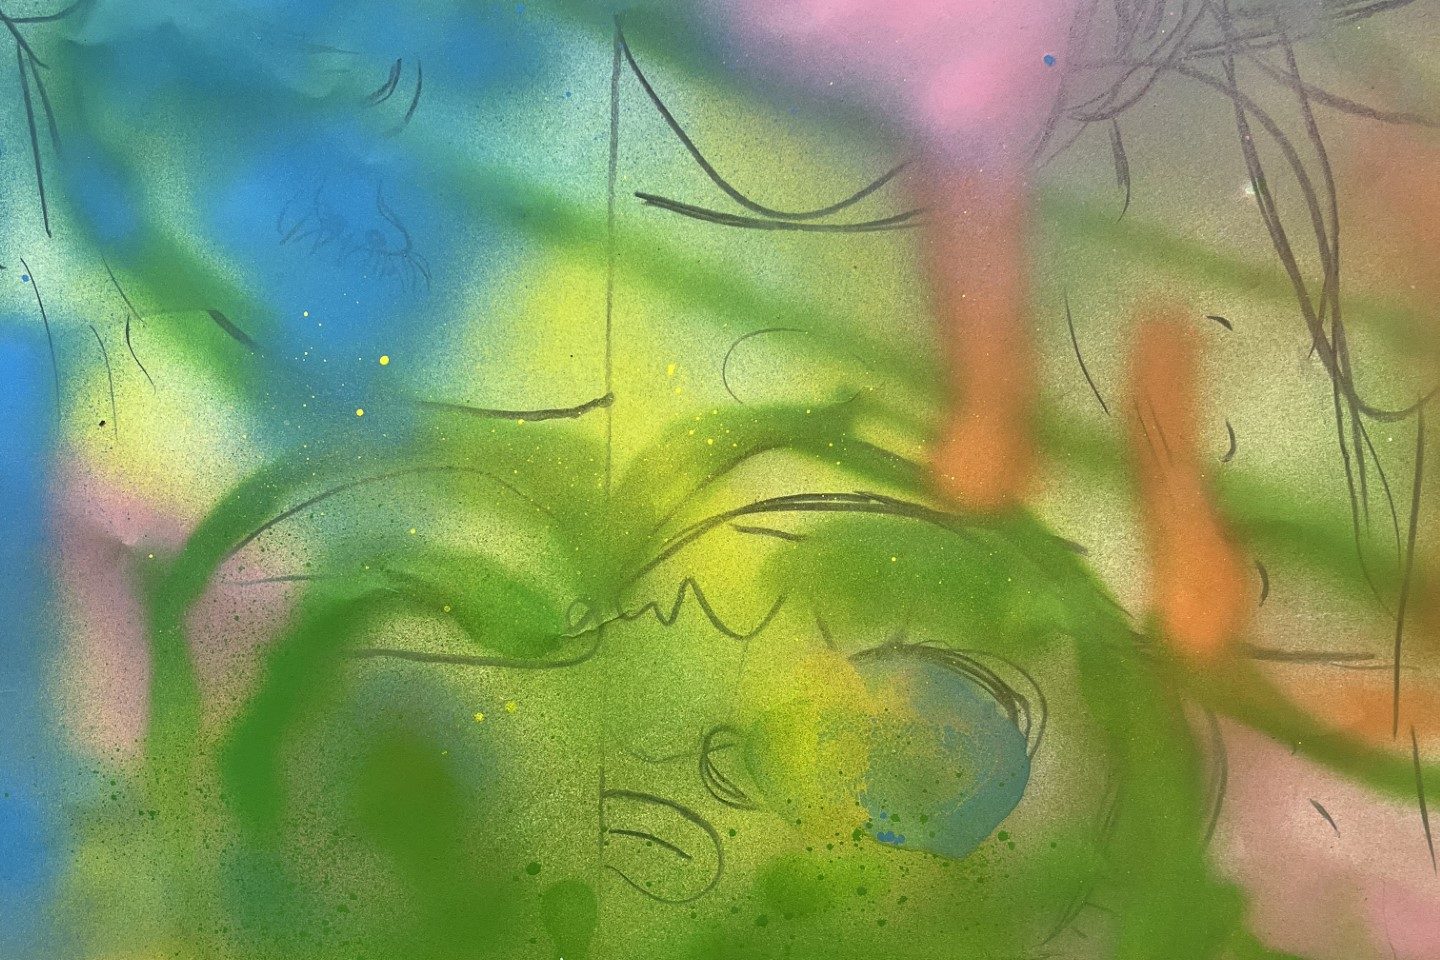 A blue and green and pink sprayed abstract painting.